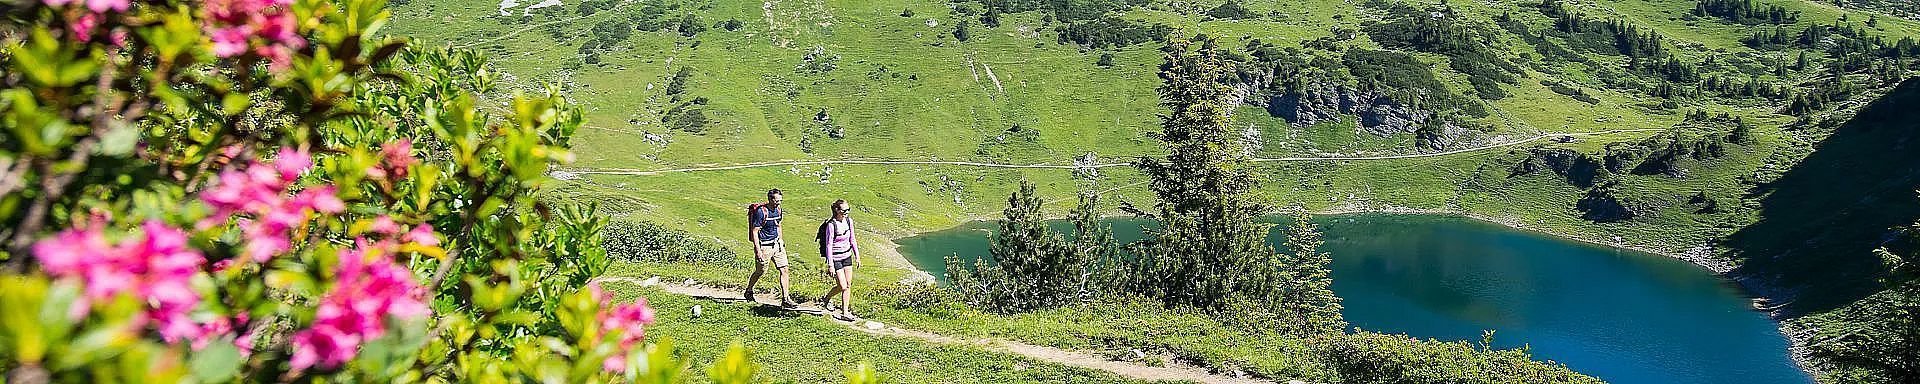 klostertal-sommer-rote wand-wandern